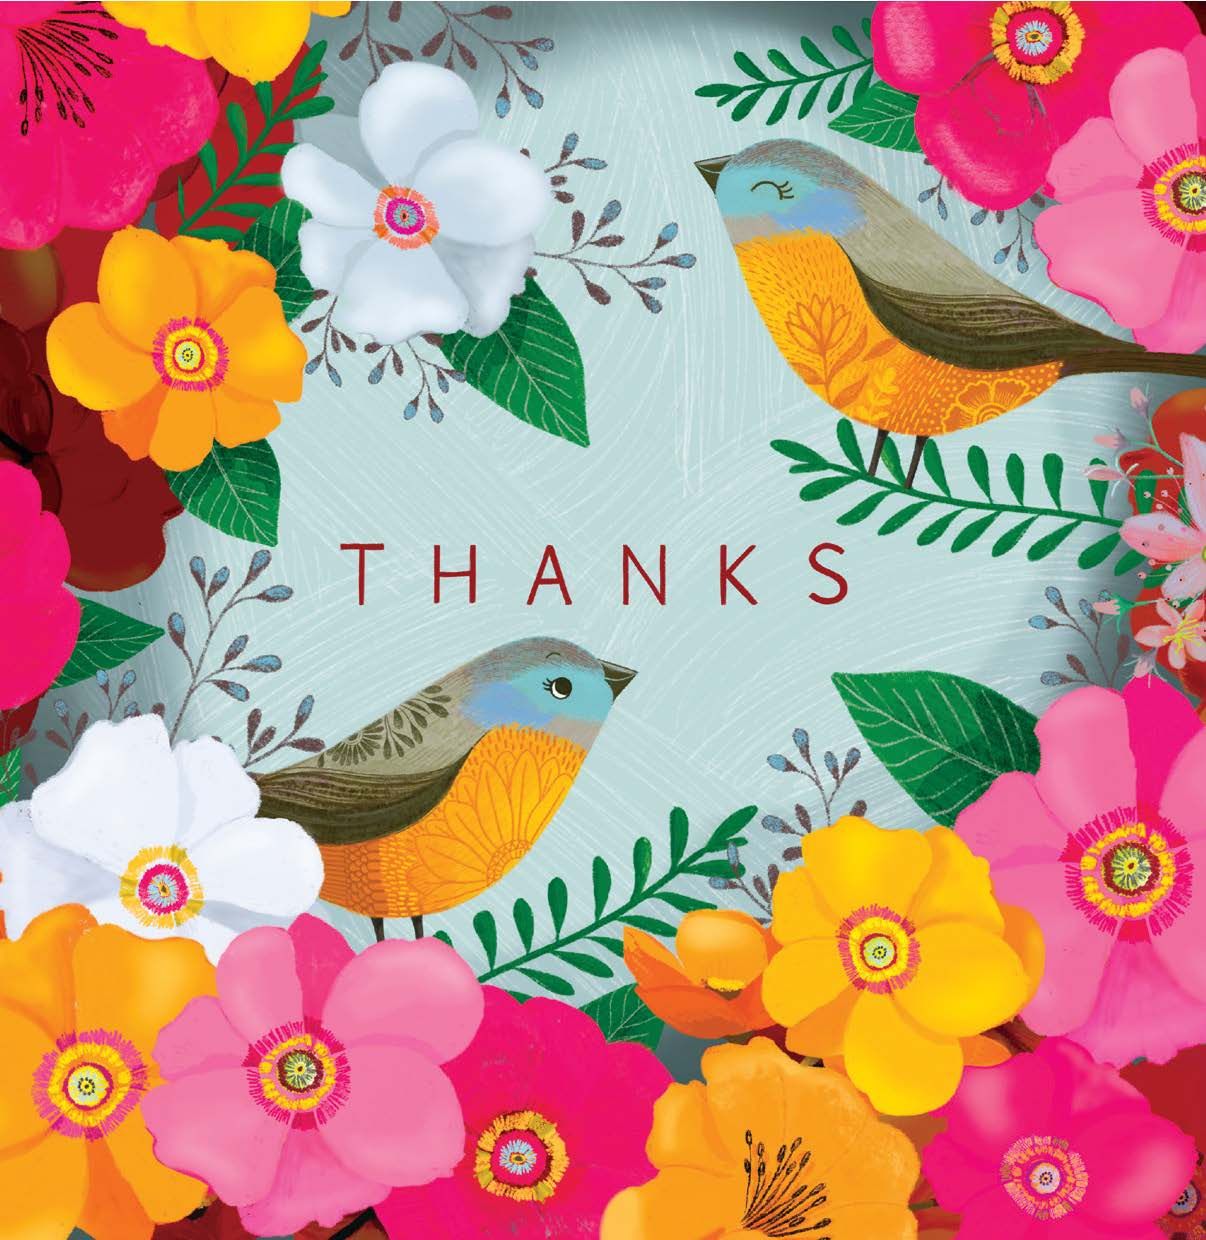 NUOVO - "THANK YOU BIRDS" SMALL GREETING CARD